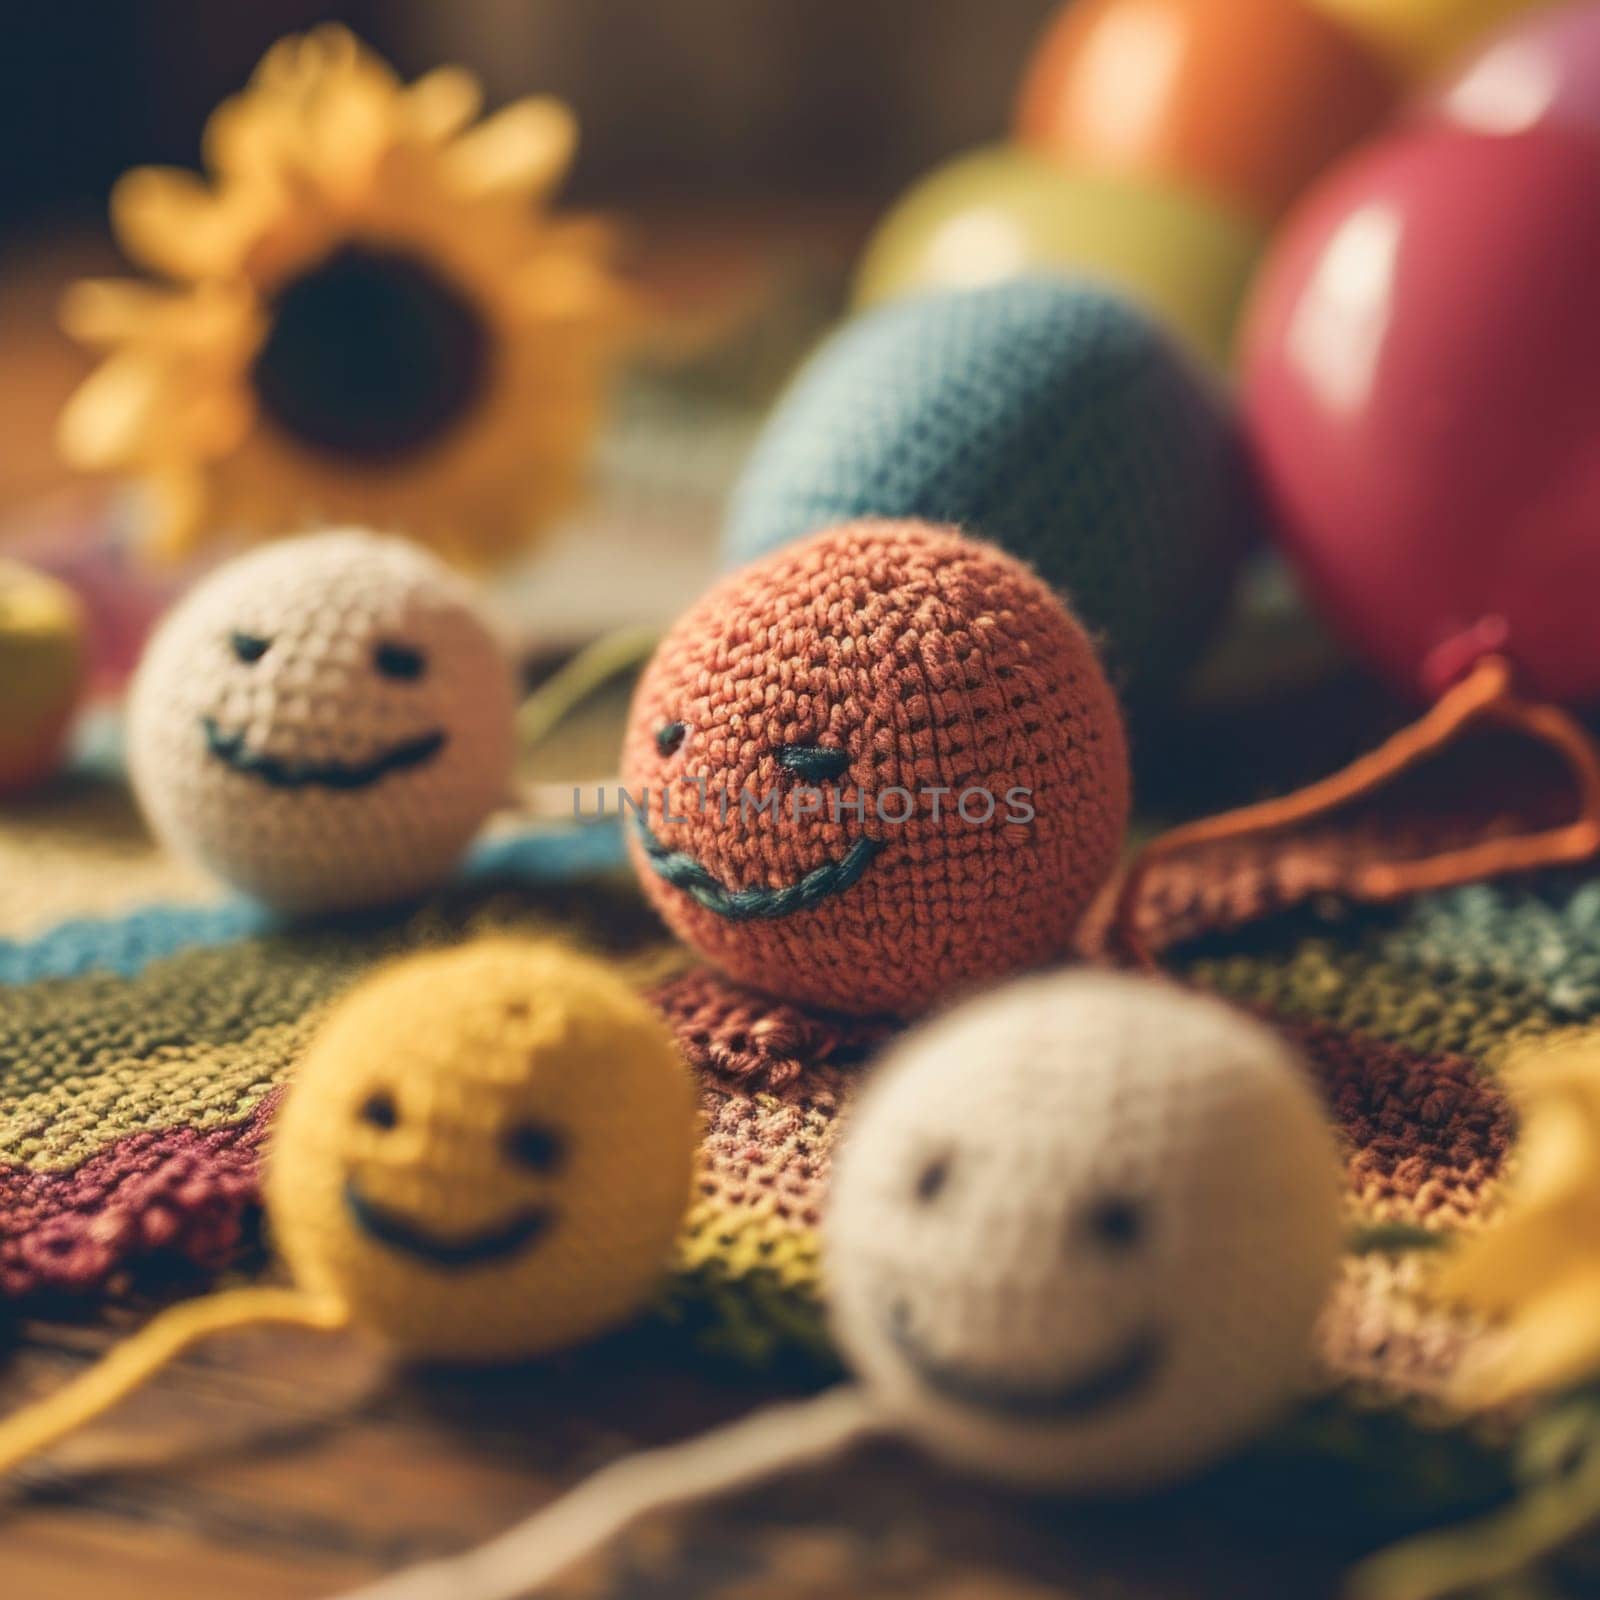 A group of crocheted balls with smiley faces on them